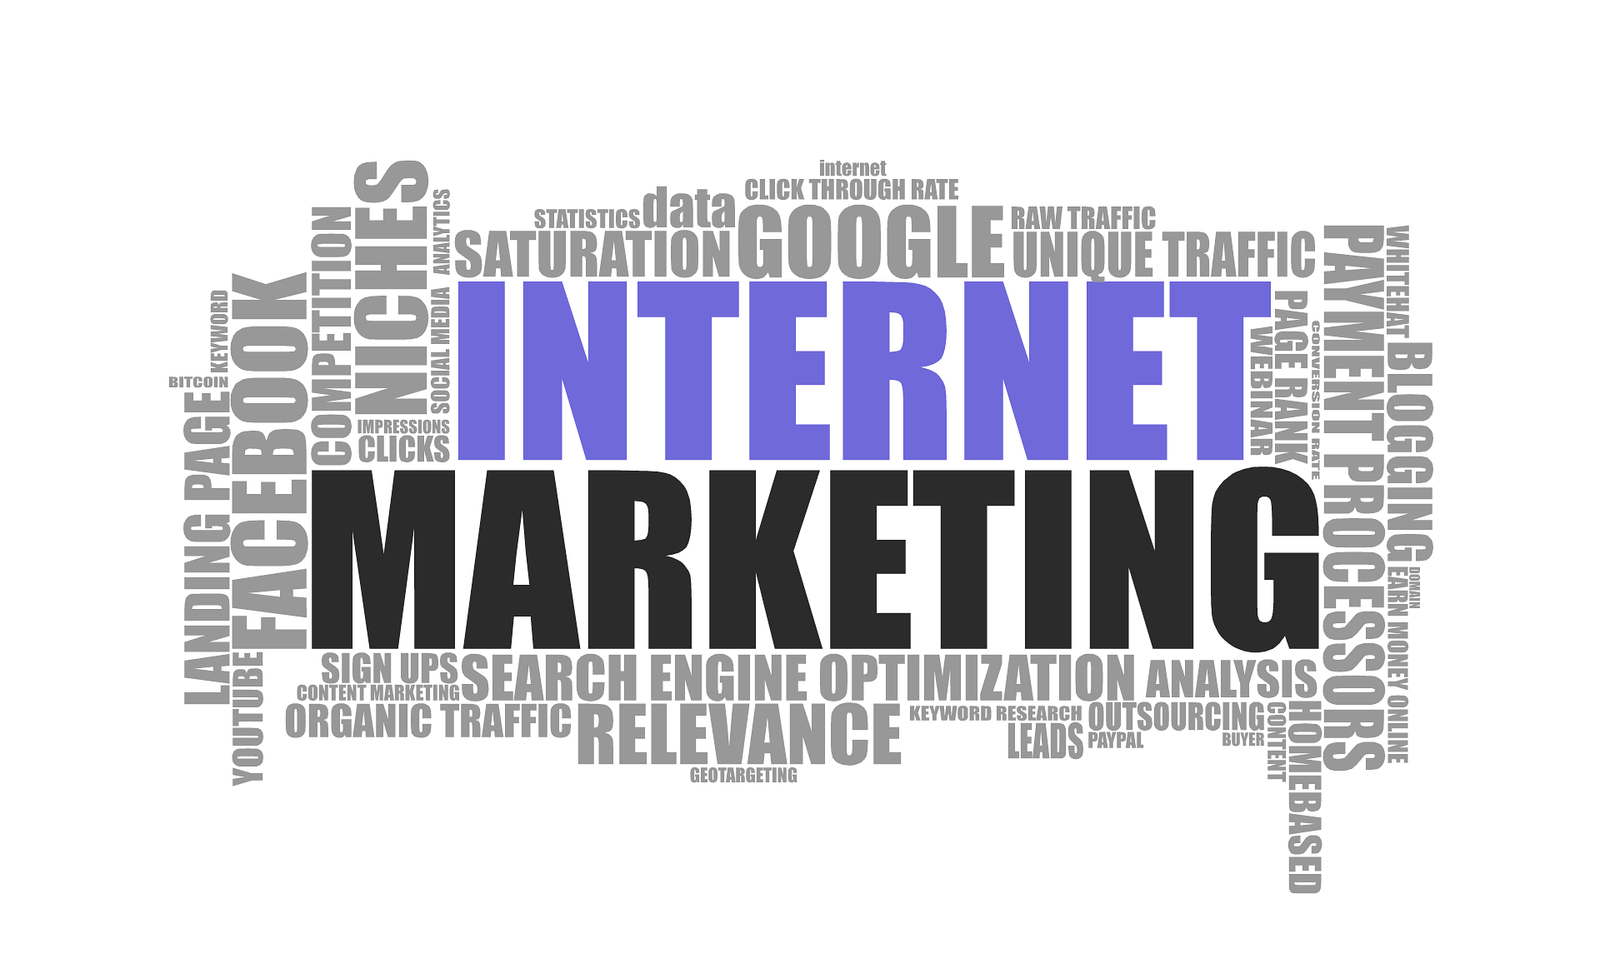 Word tag cloud on white background illustrating internet marketing concept.